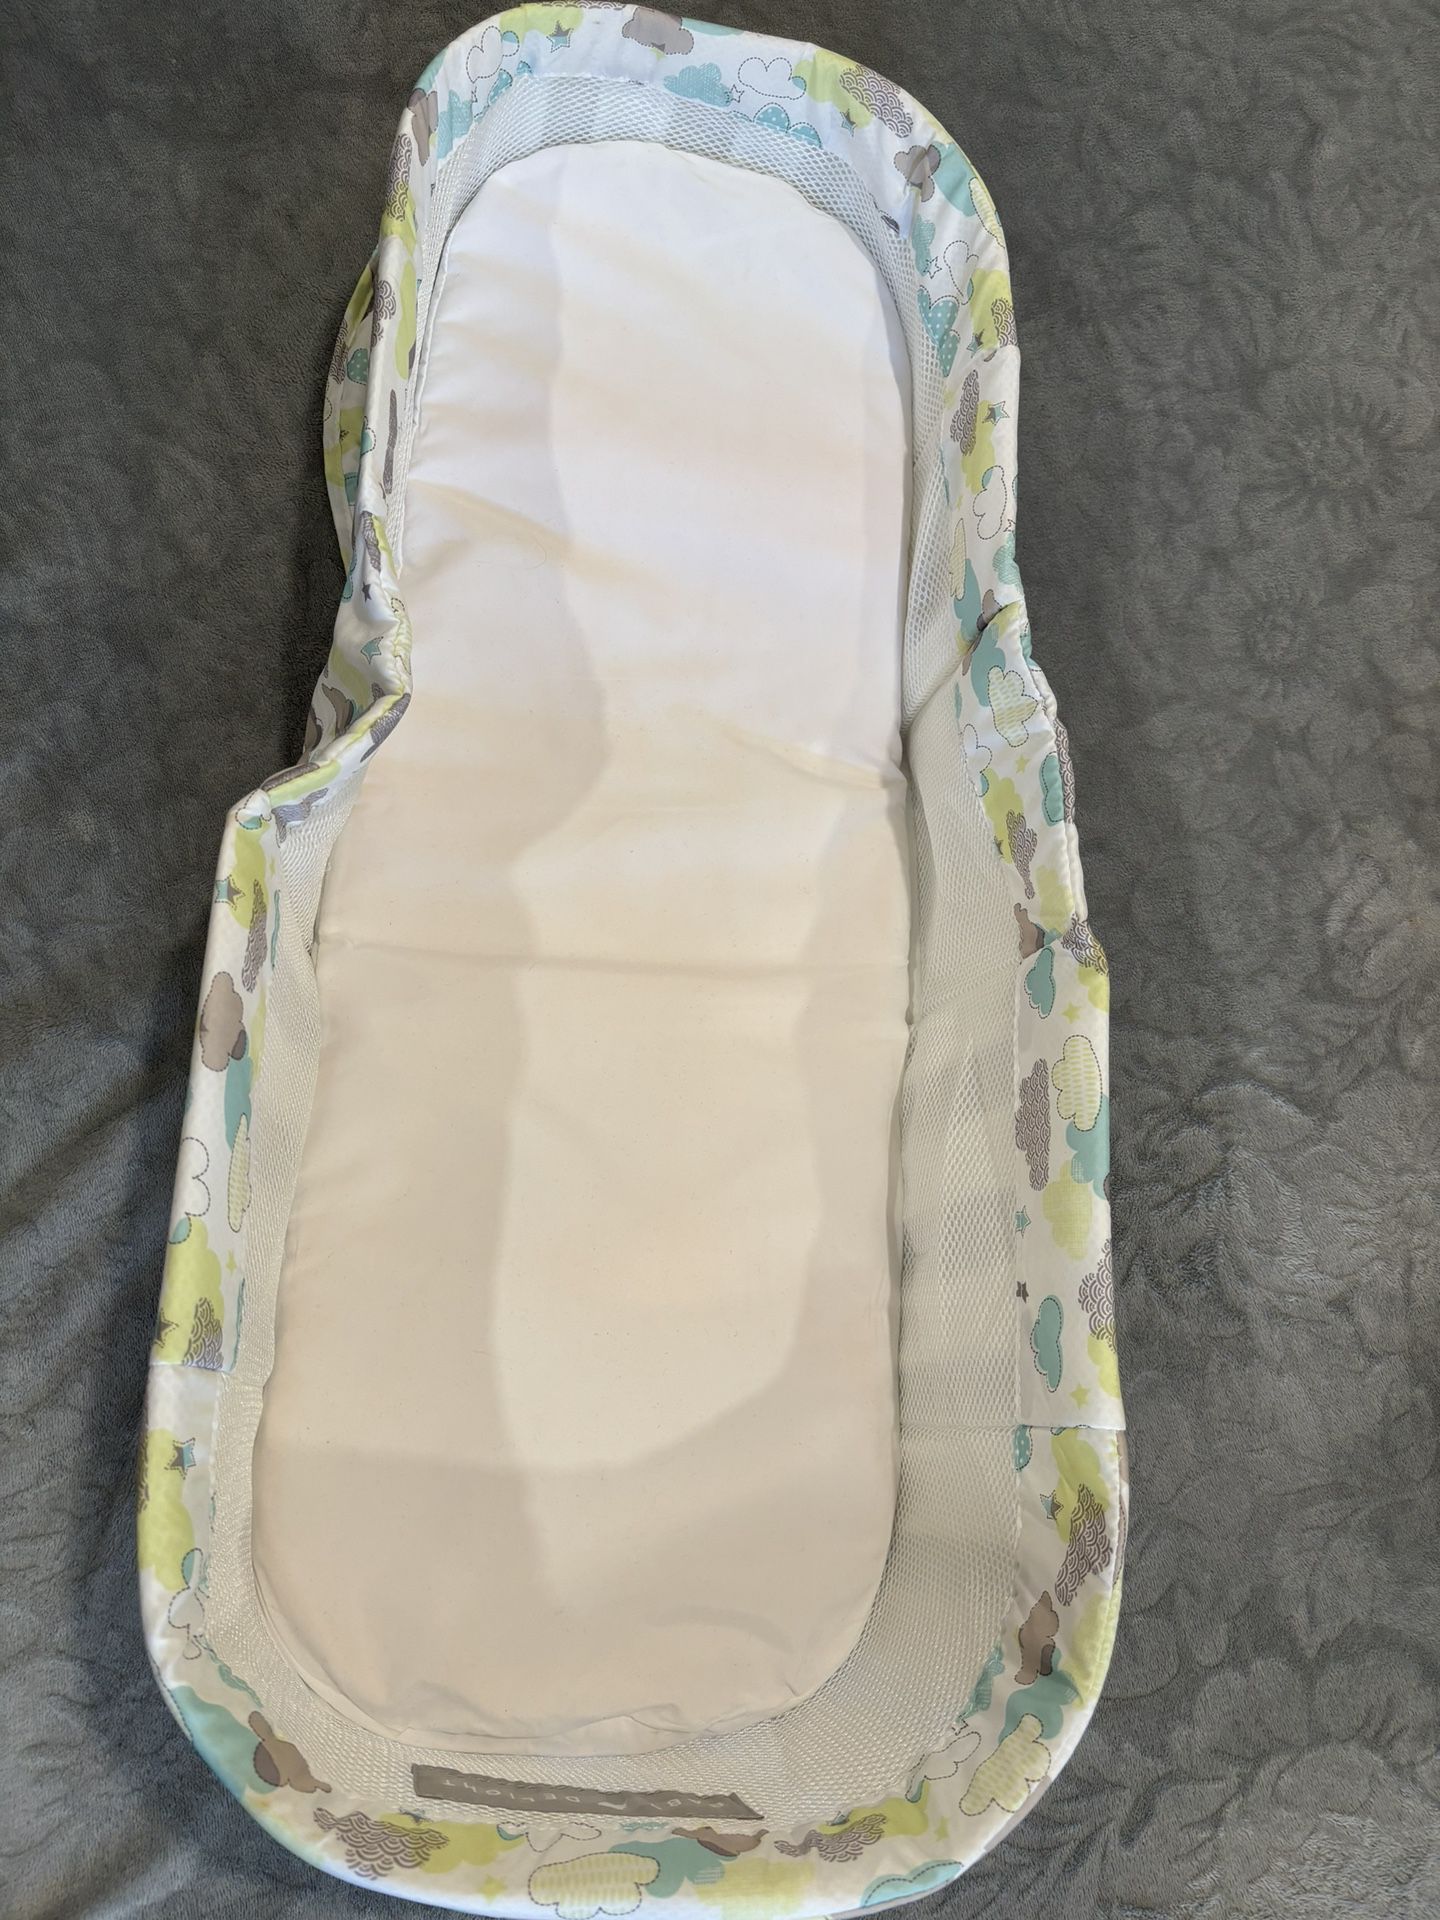 Baby Delight portable Snuggle lounger